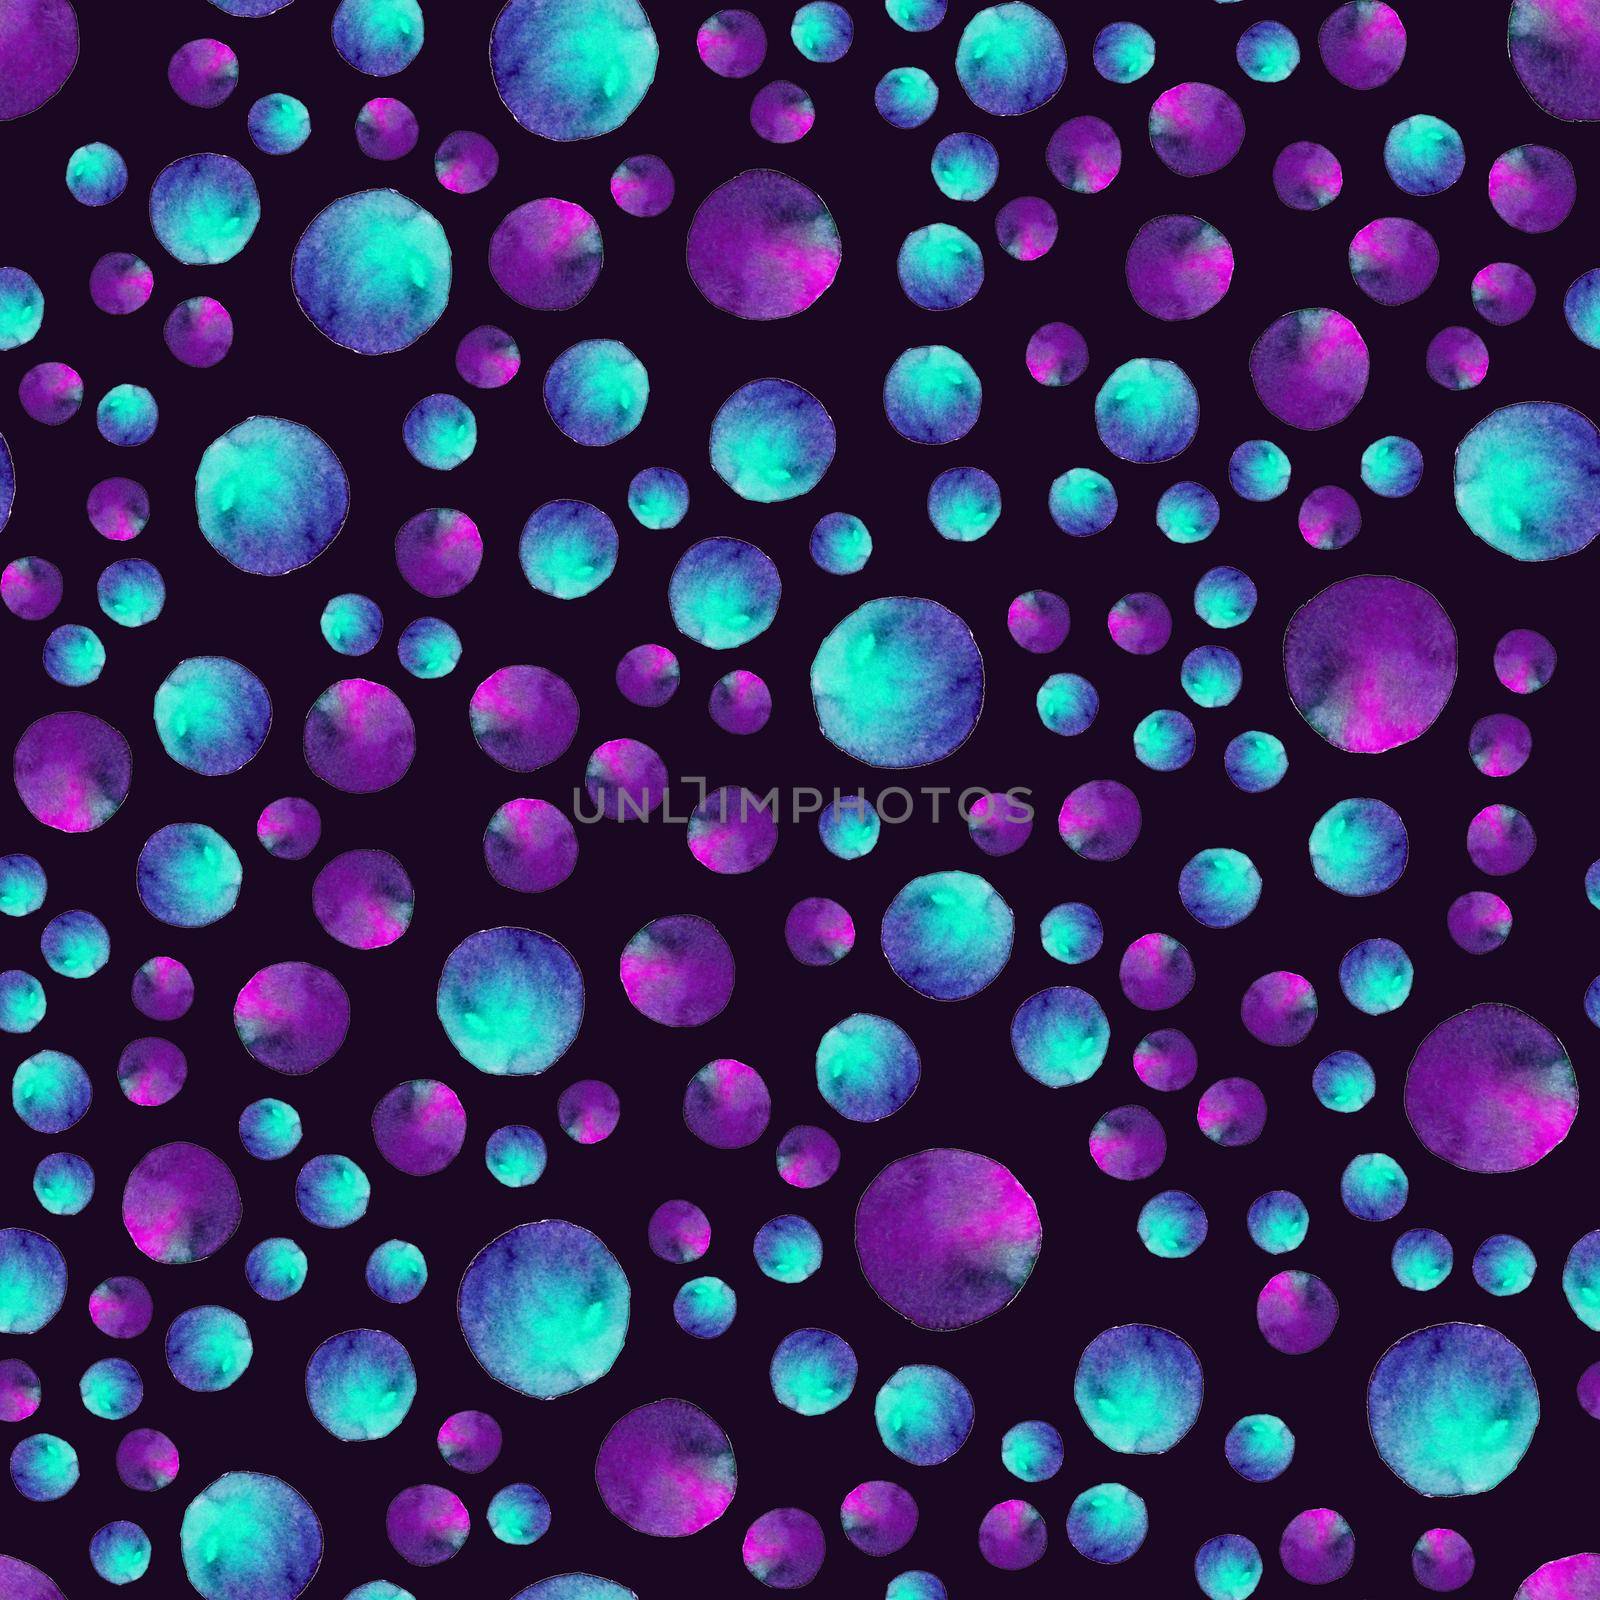 Seamless pattern. Watercolor abstract background. Watercolor round brushstrokes. On darkbackground. Colorful and endless print. Violet blue bubble gum